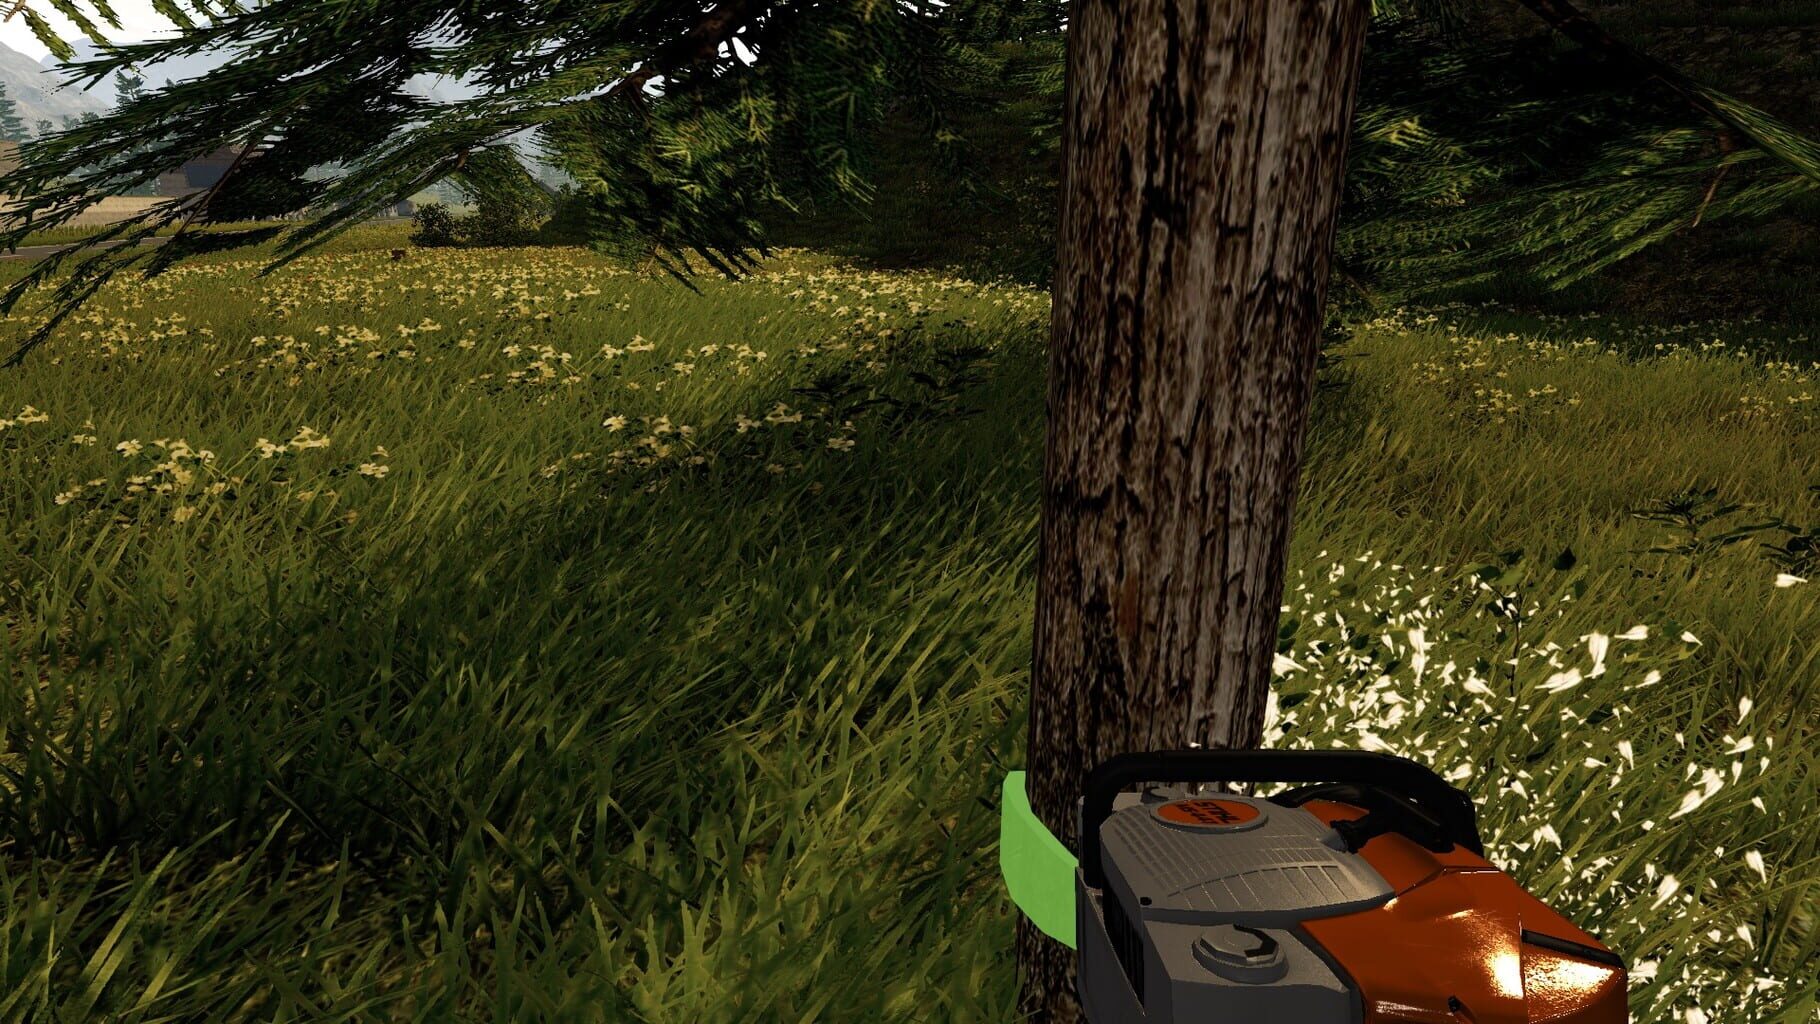 Forestry 2017 - The Simulation screenshot